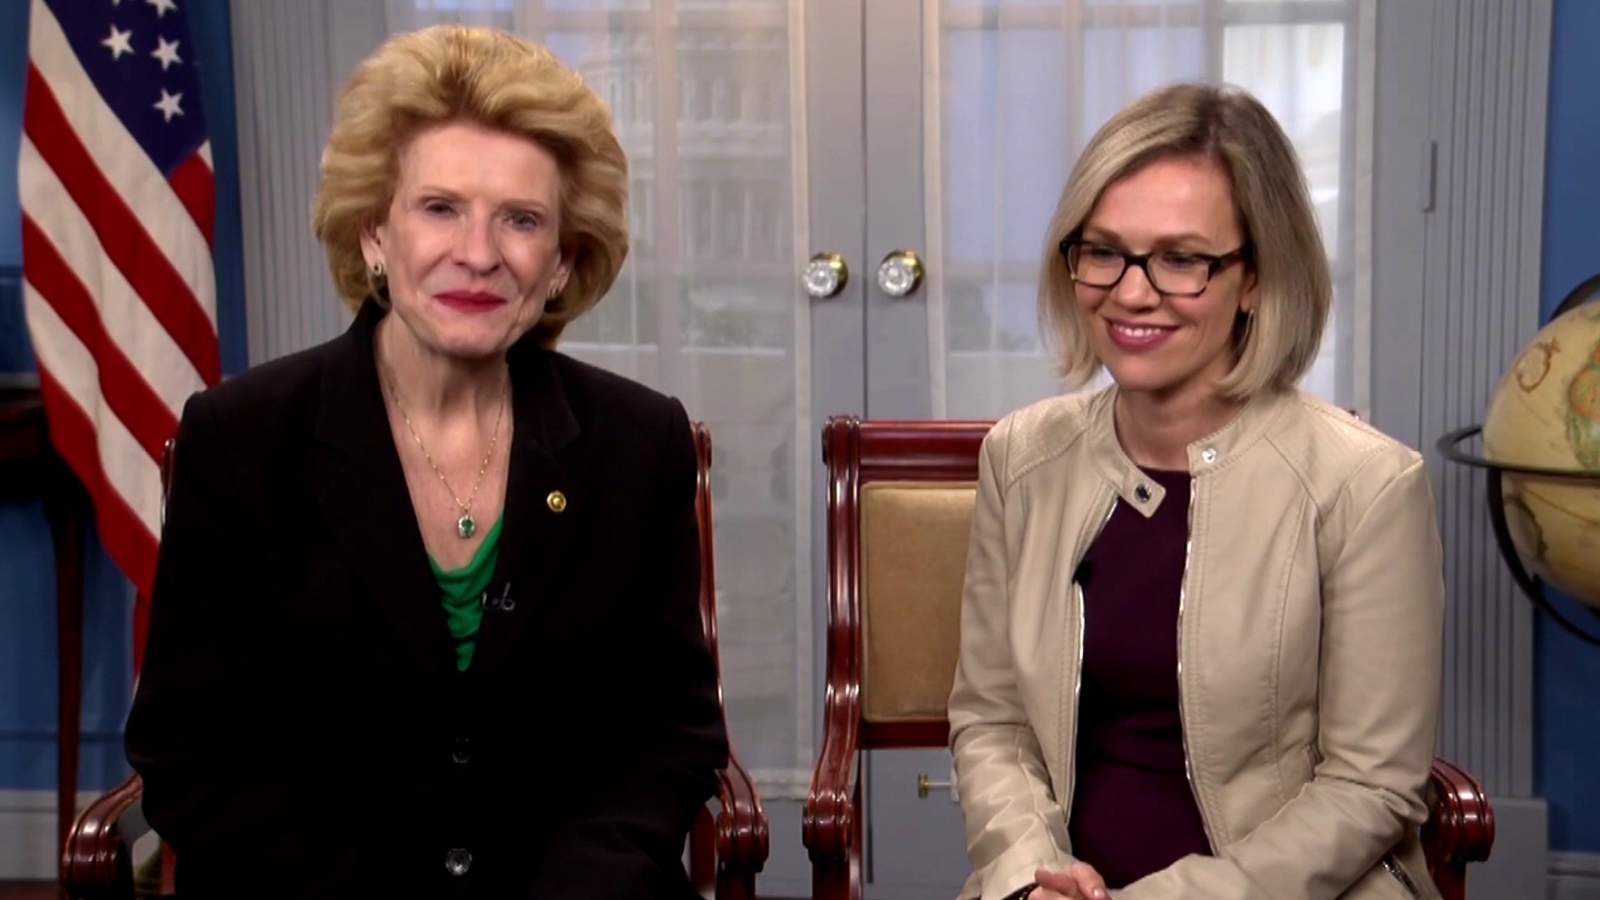 WATCH: Sen. Debbie Stabenow speaks to Local 4 ahead of President Trump’s State of the Union address